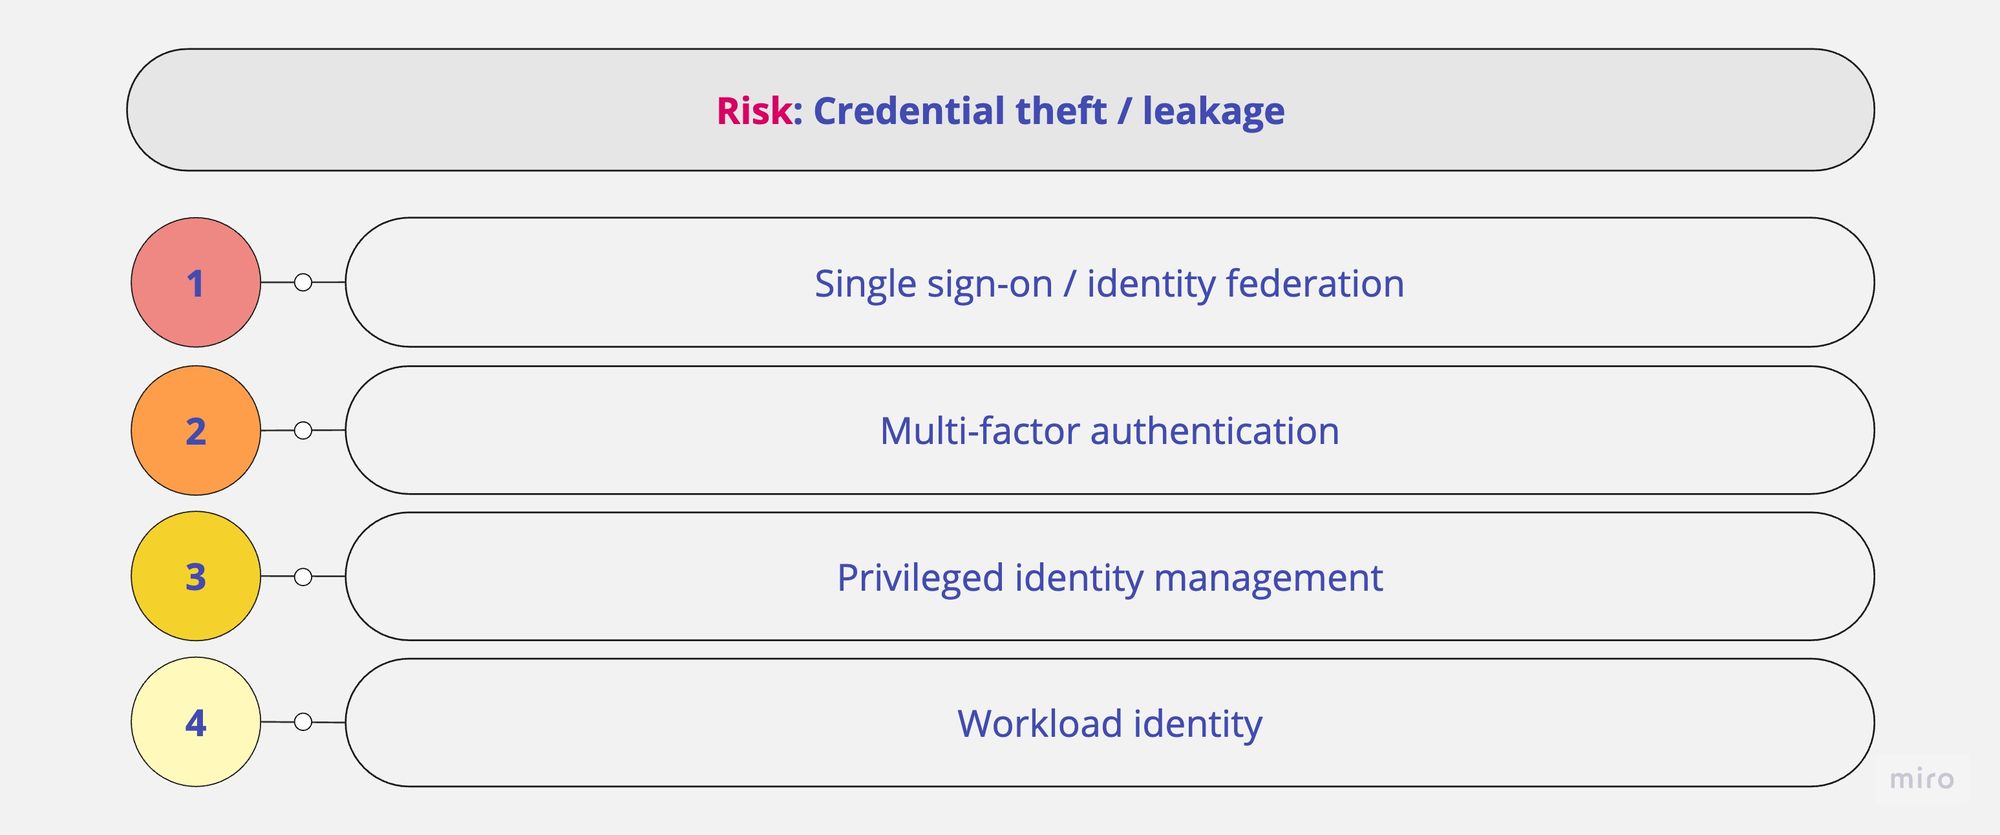 Cloud security risk - credential theft/leakage